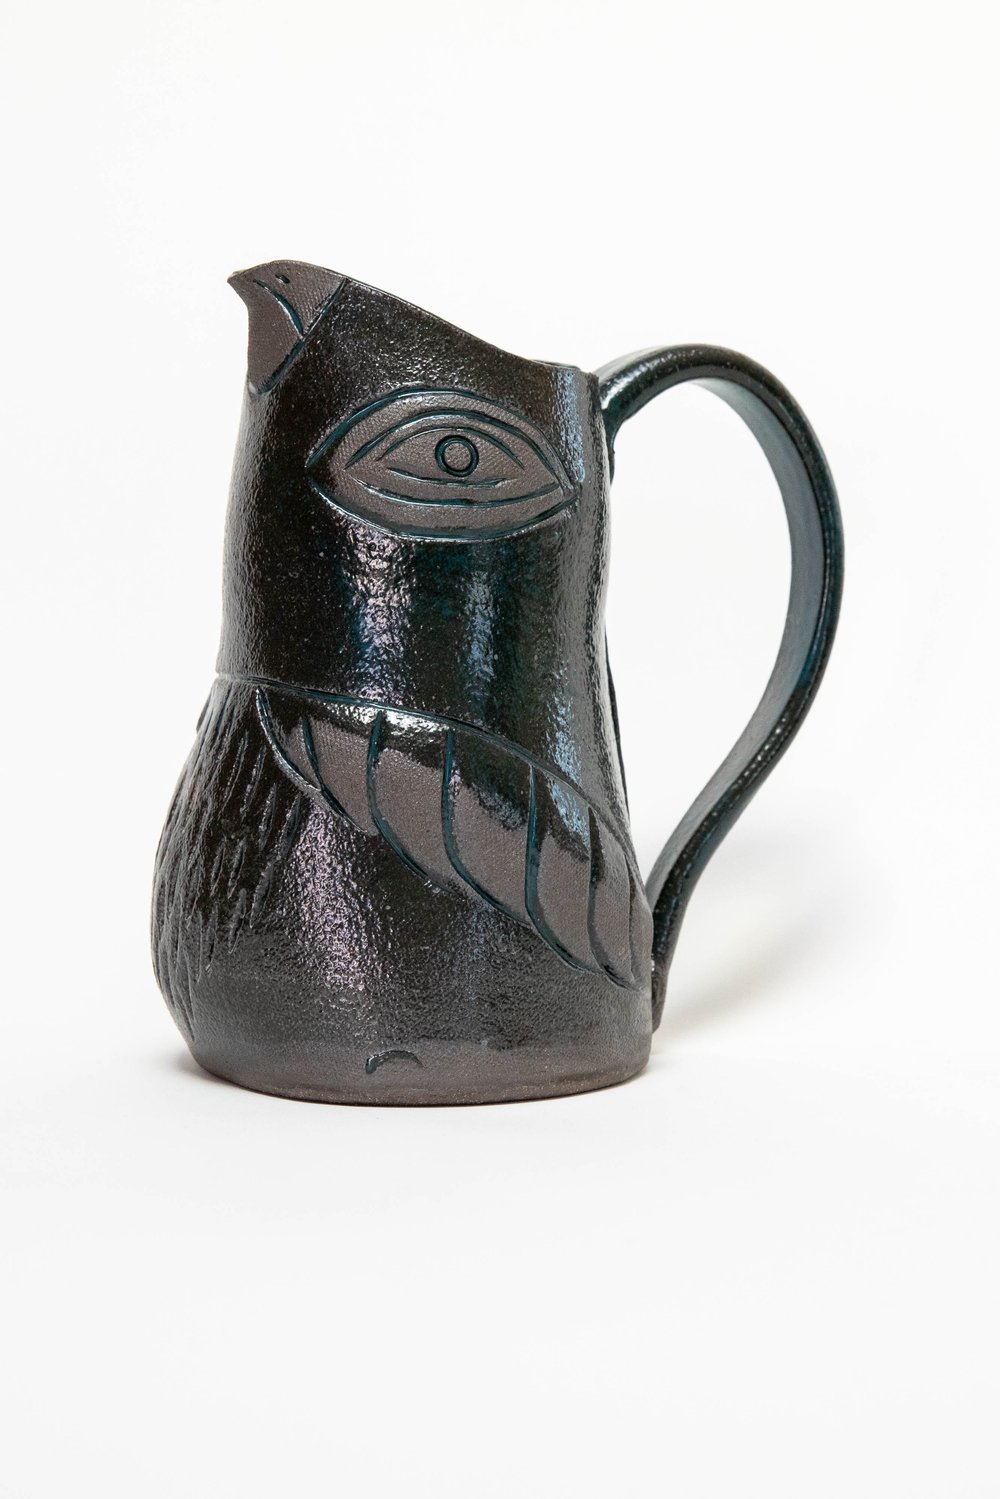 Image of Large Family Size Dark Teal Almond Eyed Bird Pitcher